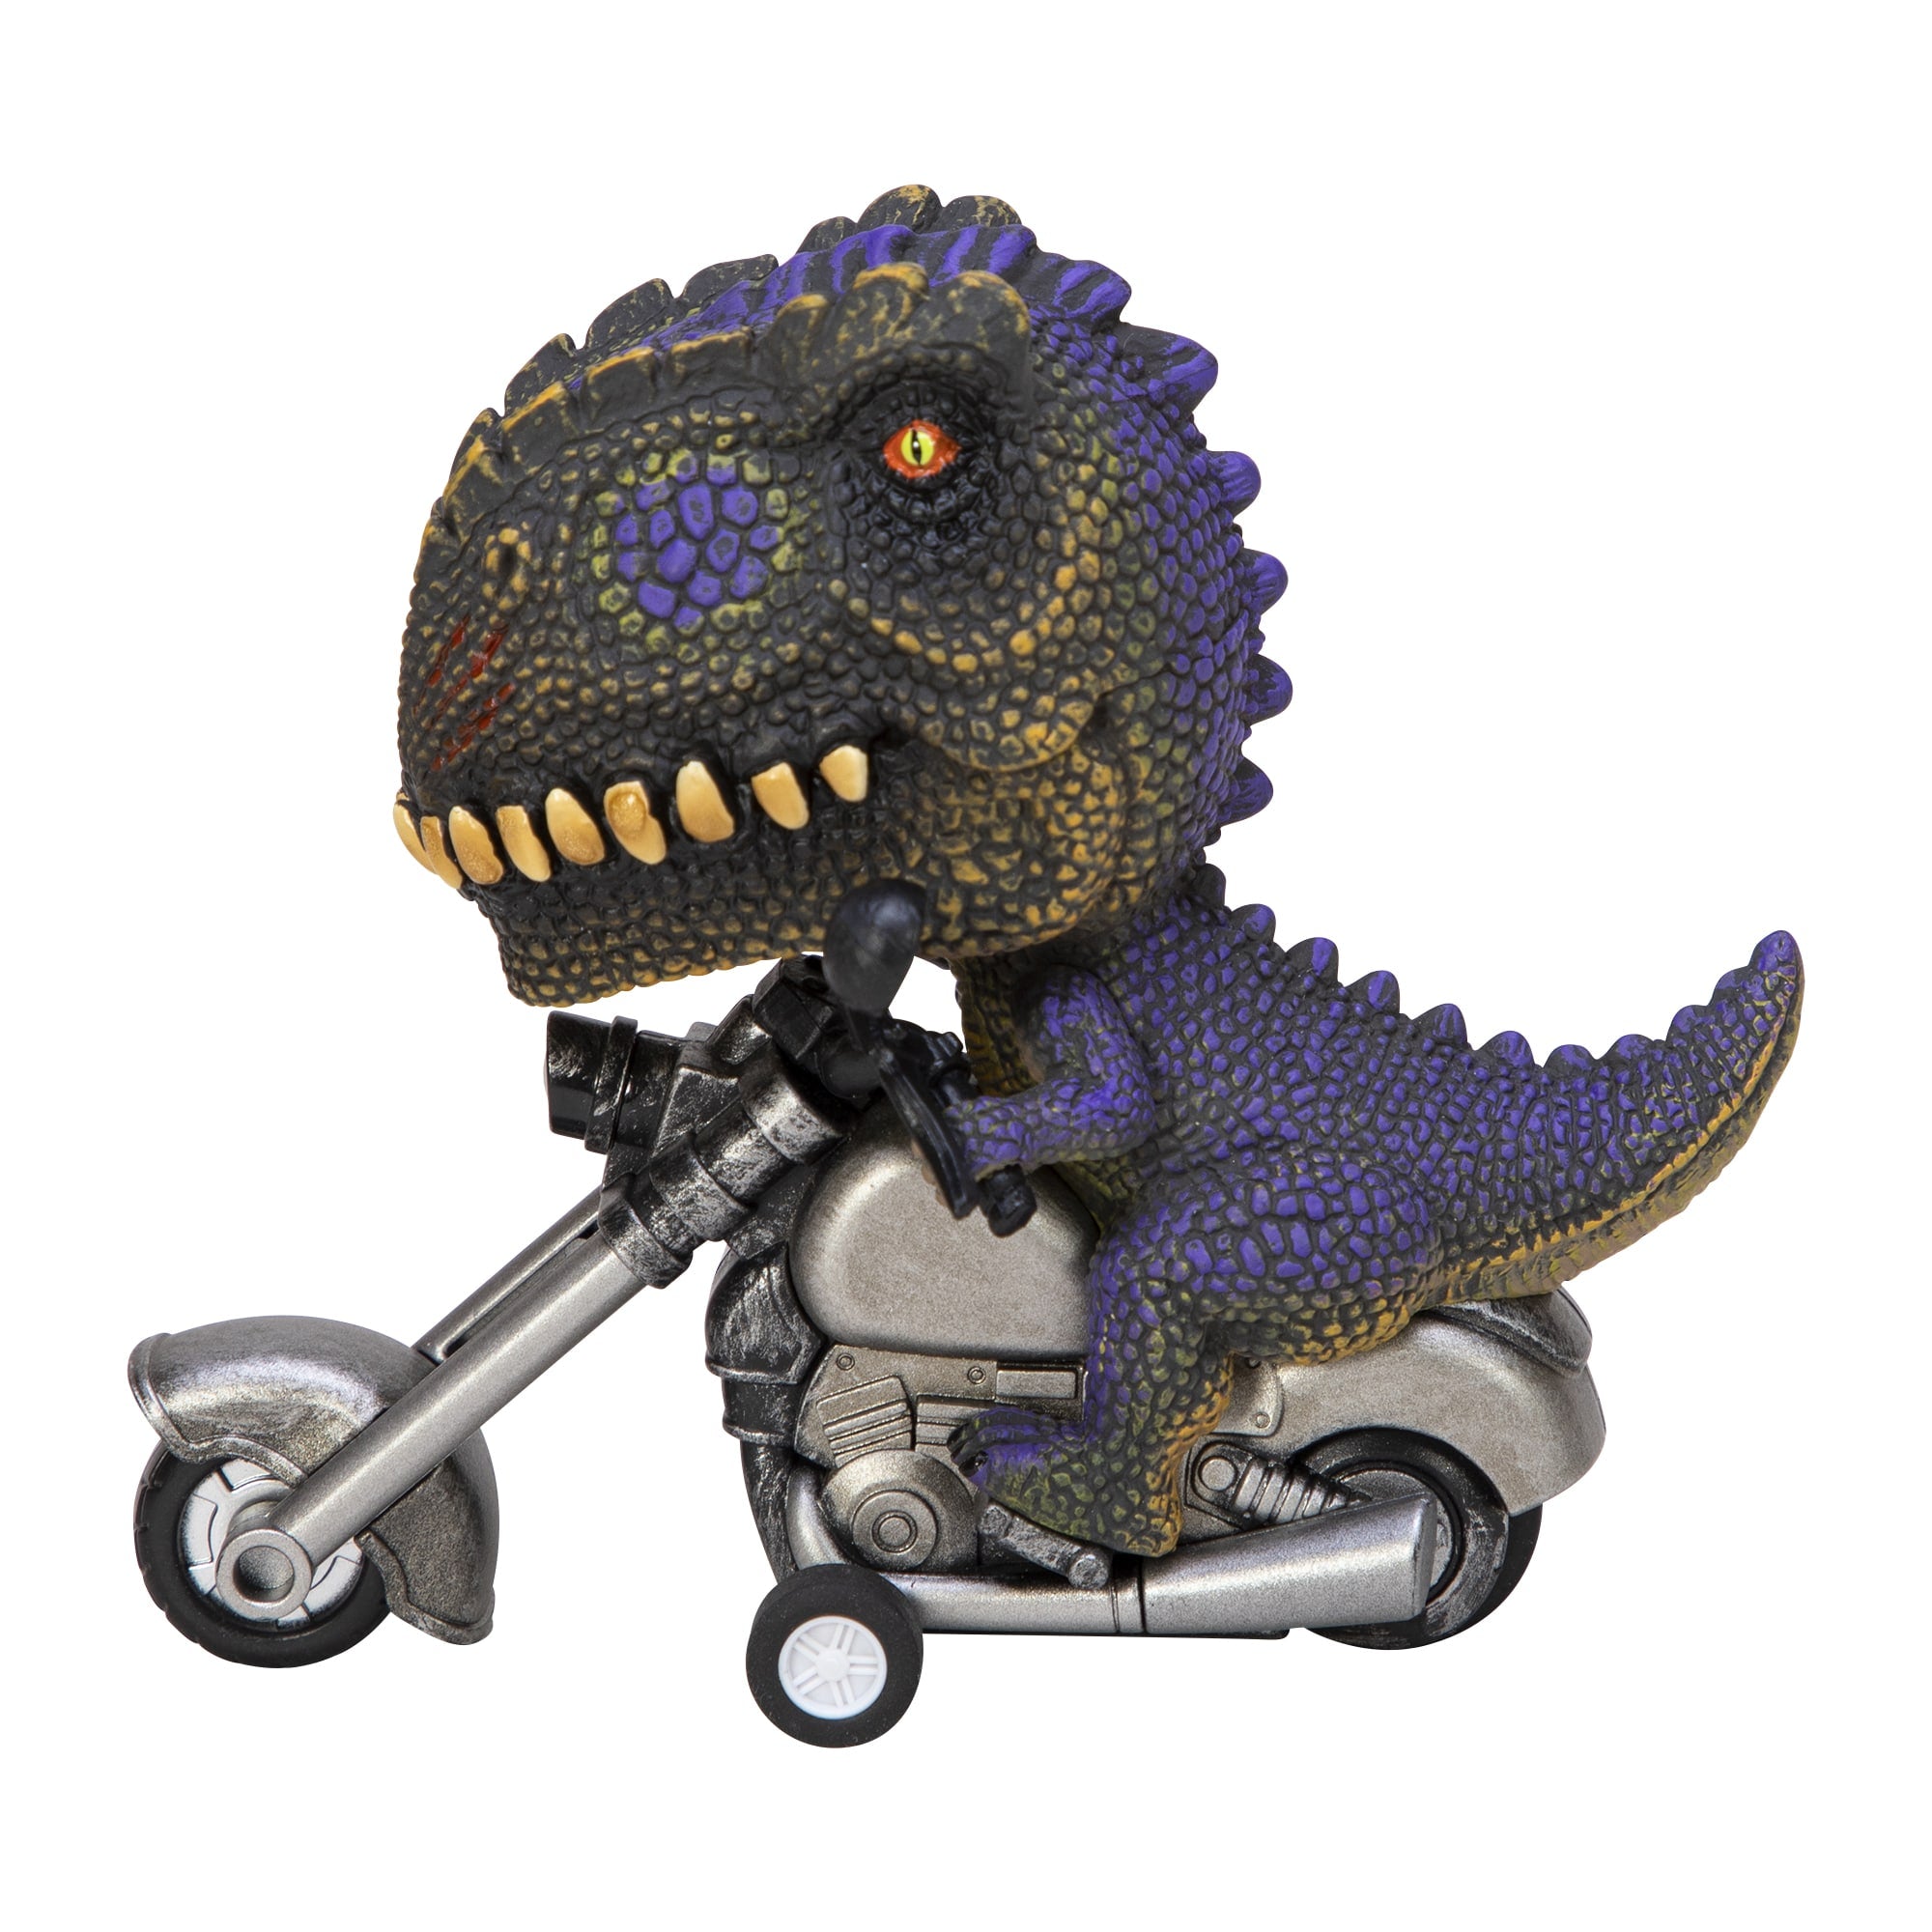 T-Rex Riders - Friction Motorcycles - Purple, Green or Red    